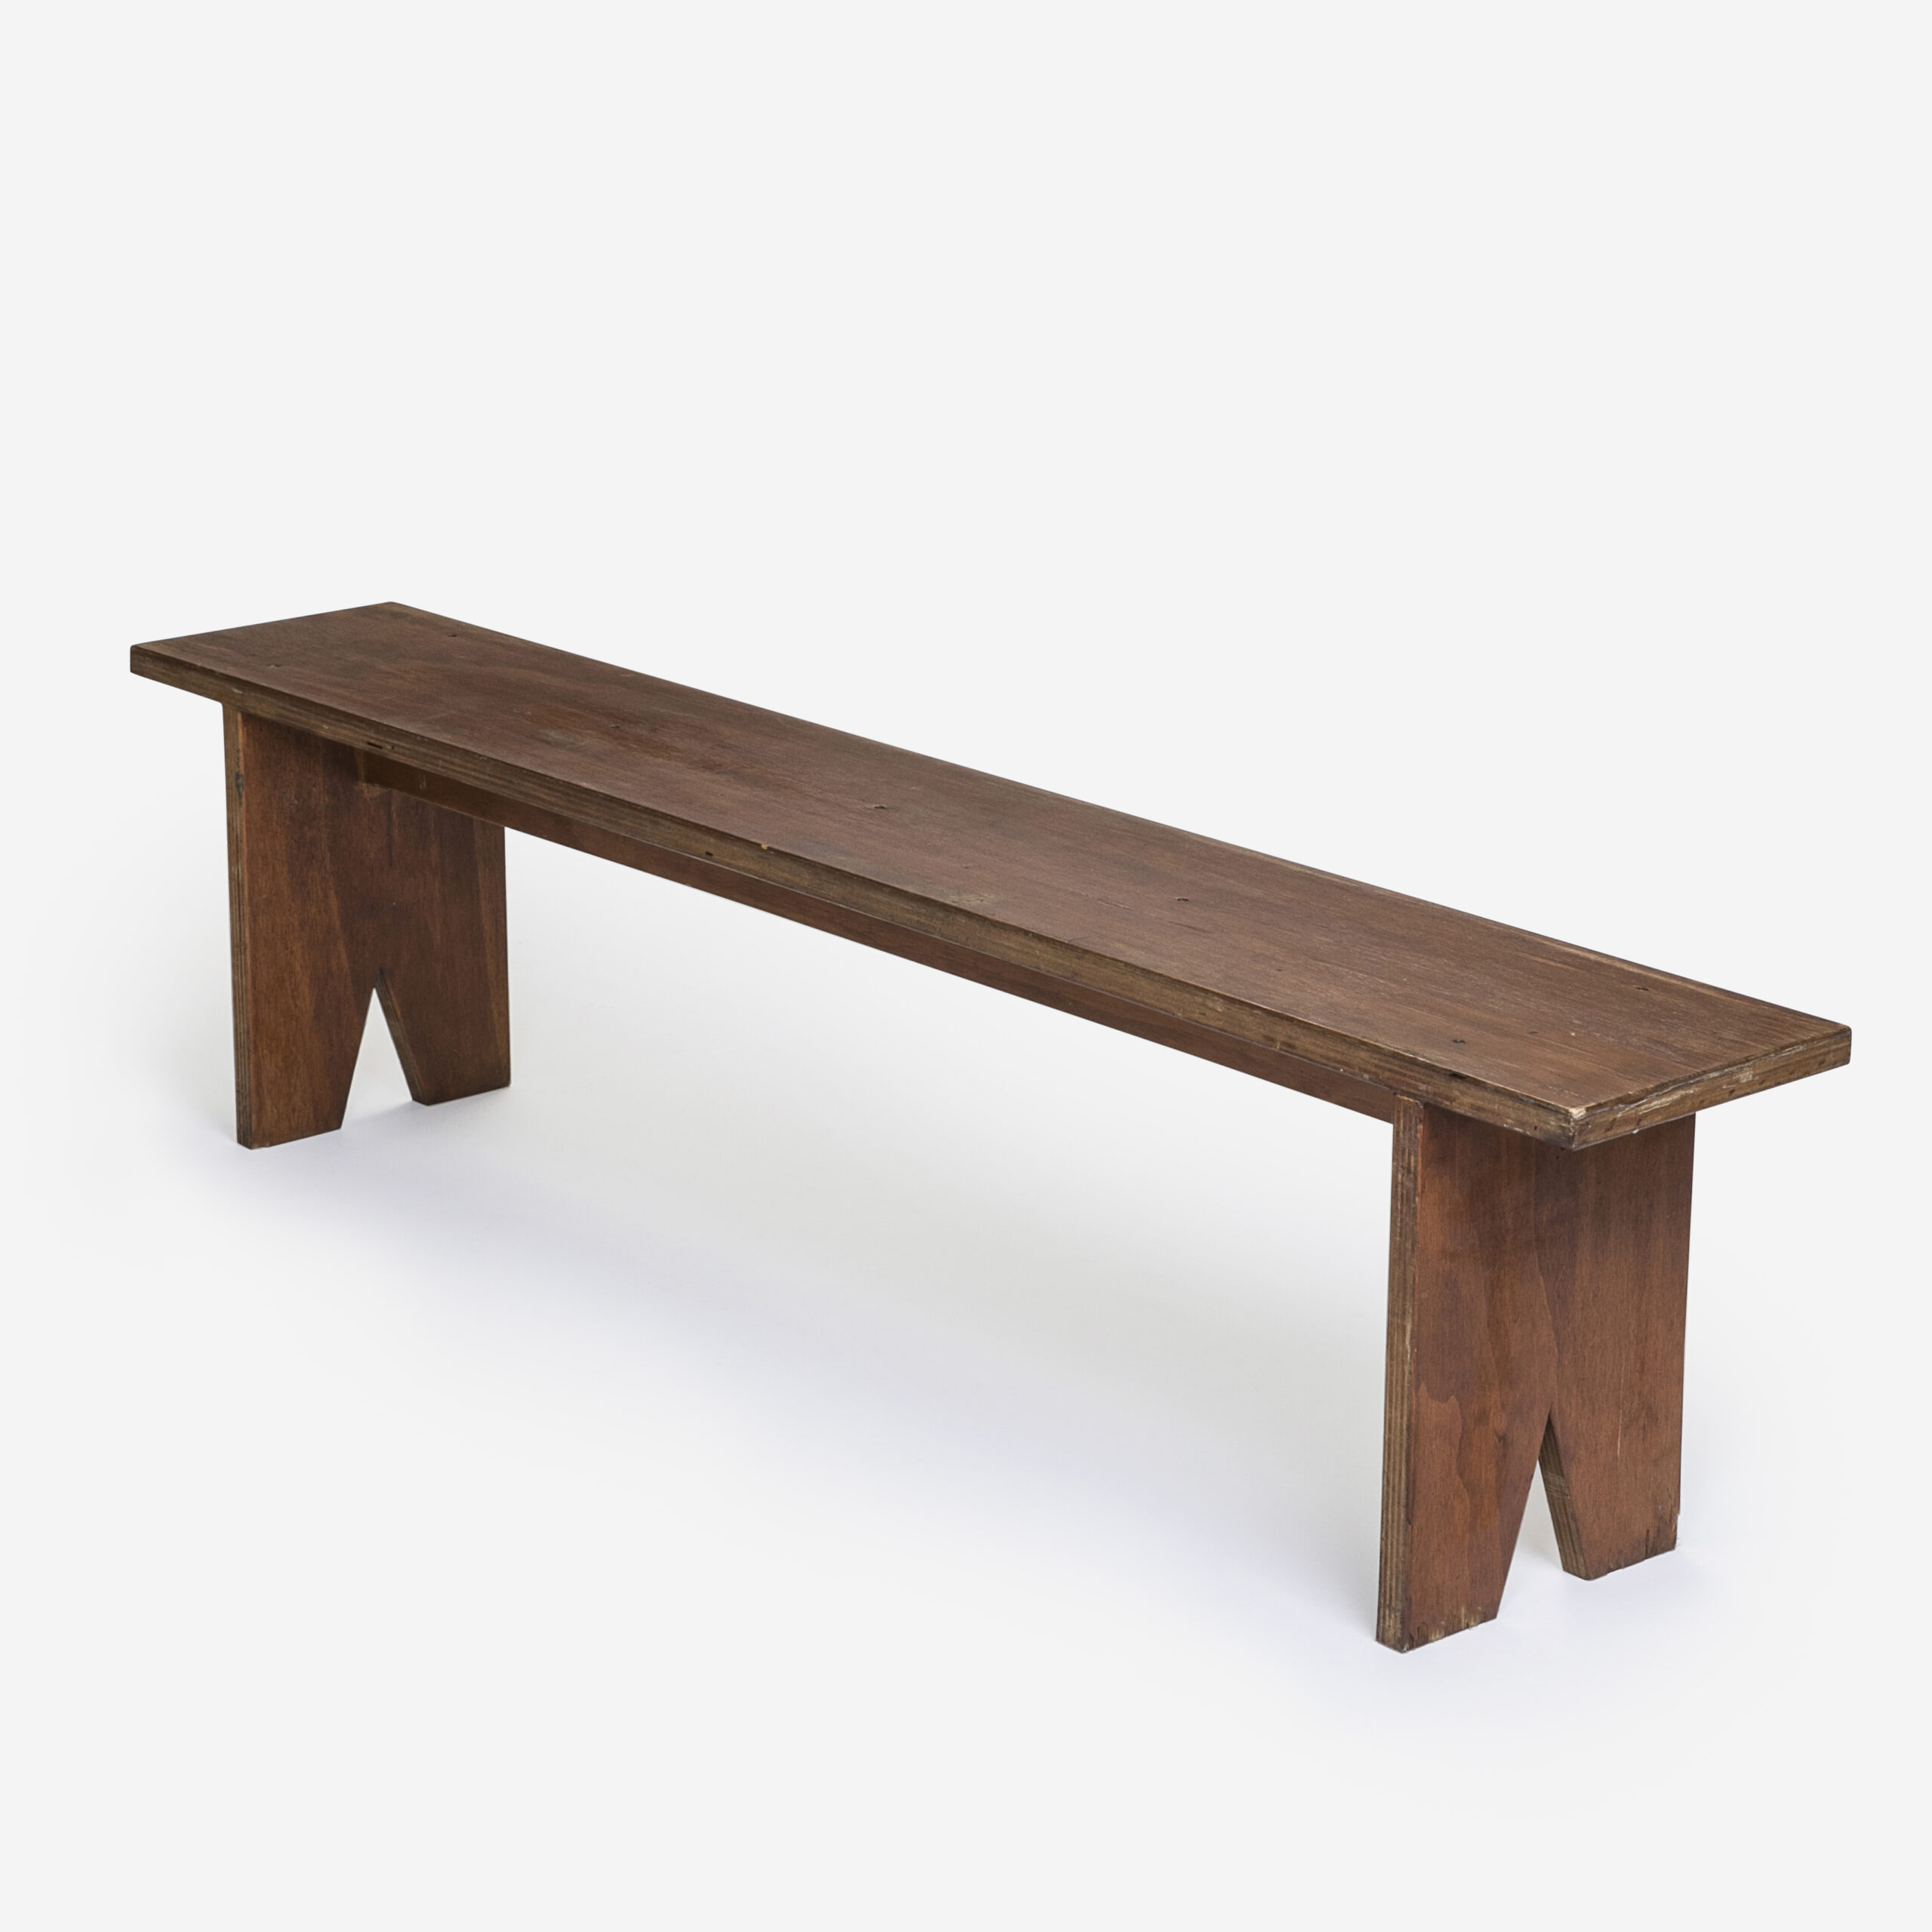 Rustic Timber Bench Seat